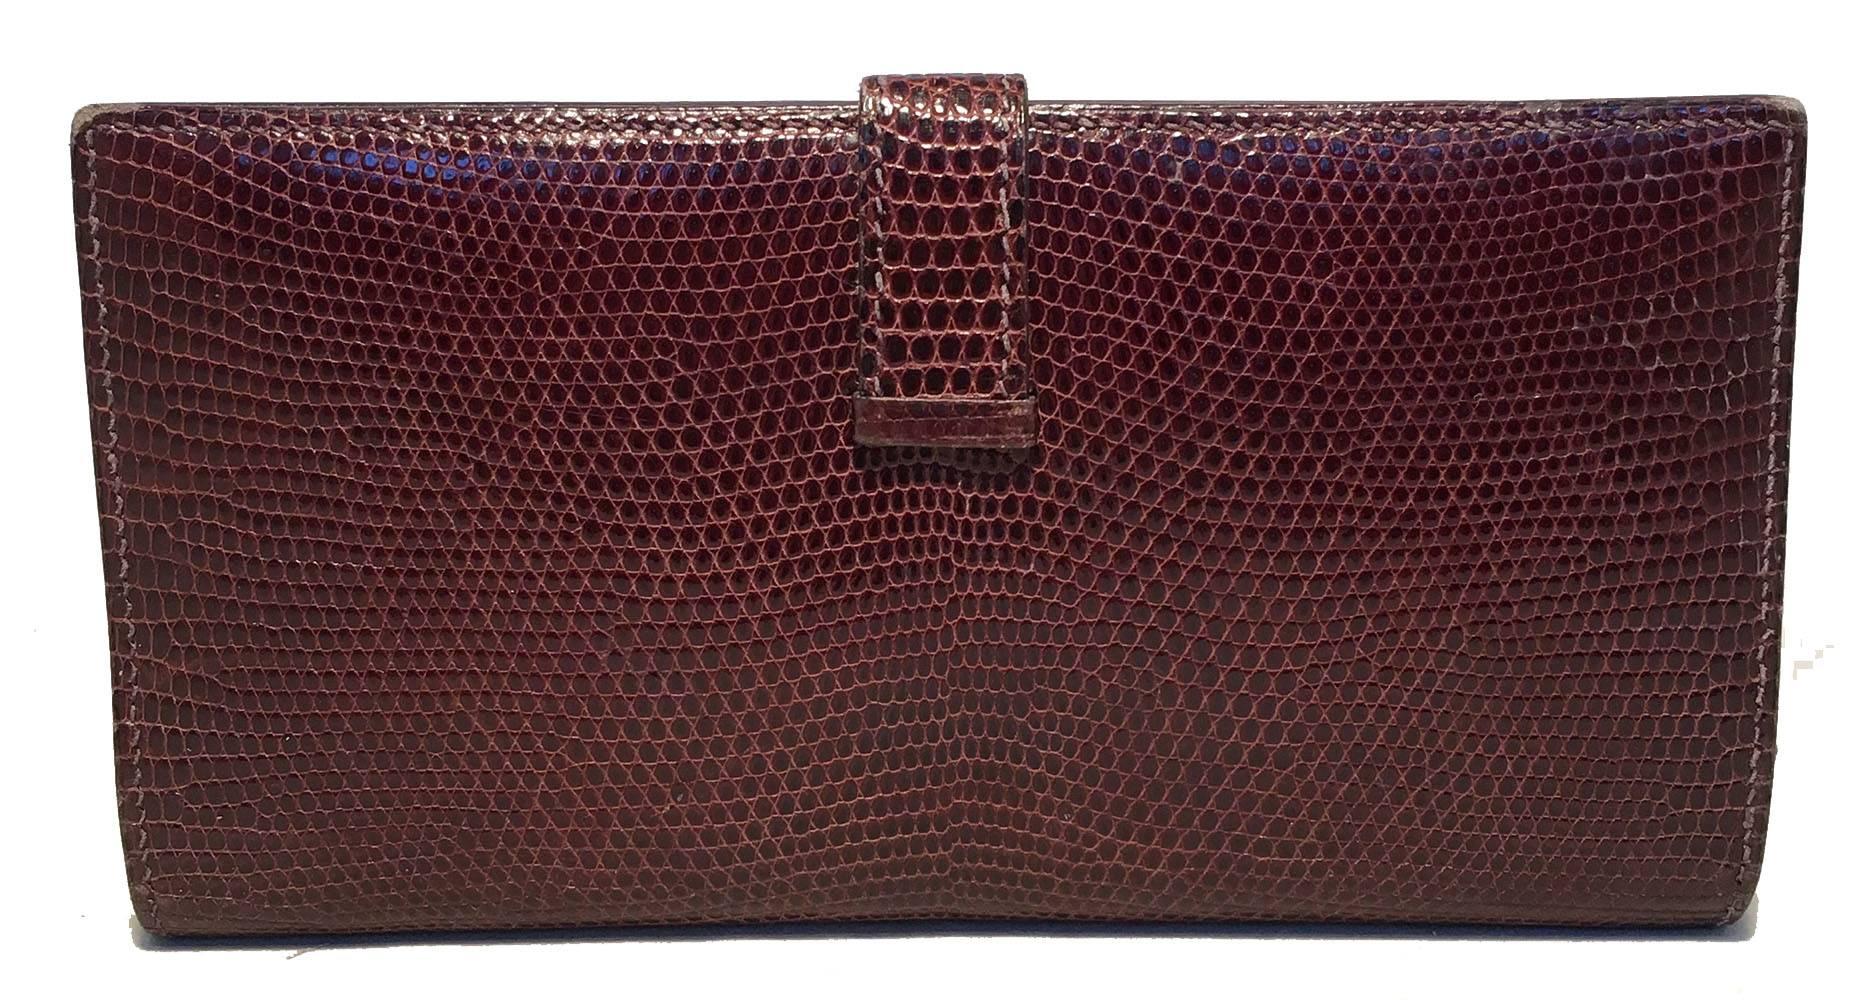 AMAZING Hermes Brown Lizard H Wallet in excellent condition.  Brown lizard leather exterior trimmed with gold hardware.  Sliding strap closure opens to a brown kidskin lined interior that holds 5 card slit pockets, 3 larger slit pockets and a